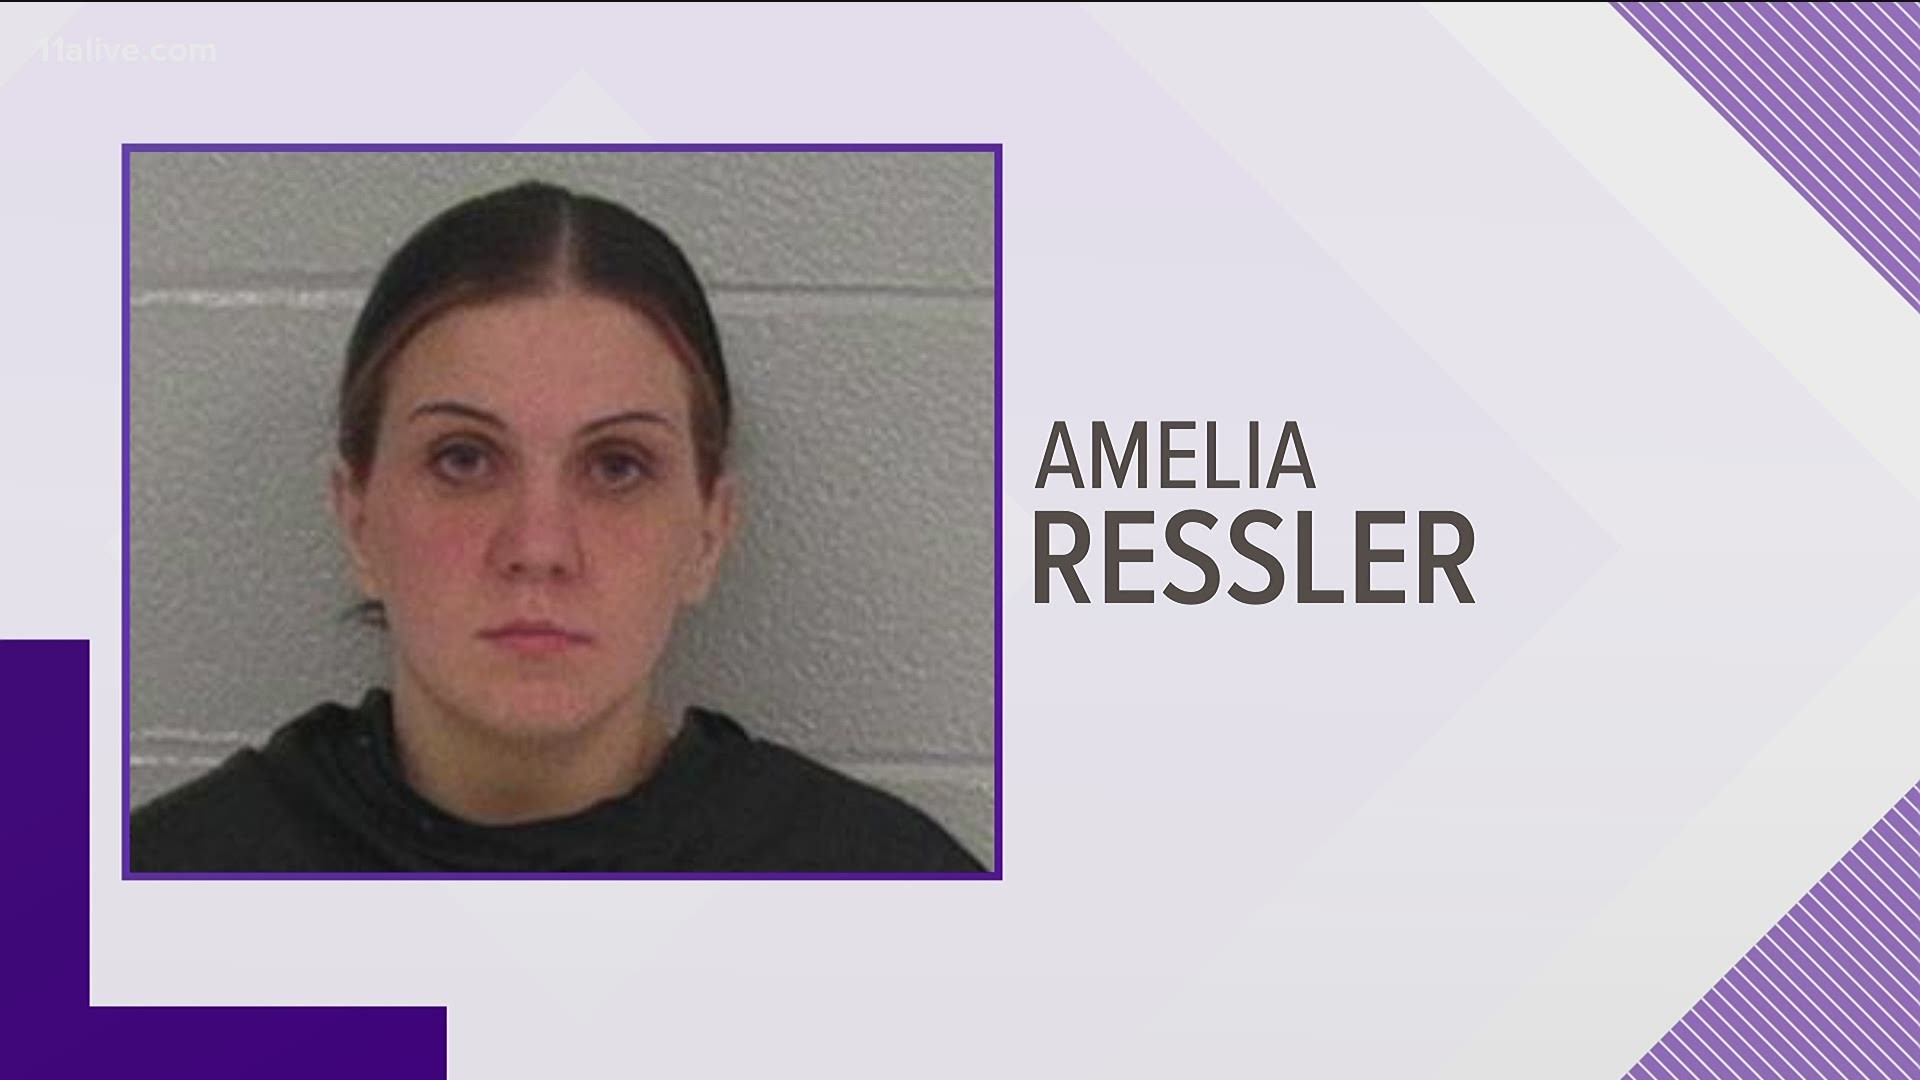 Amelia Ressler is still in jail following her first court appearance.